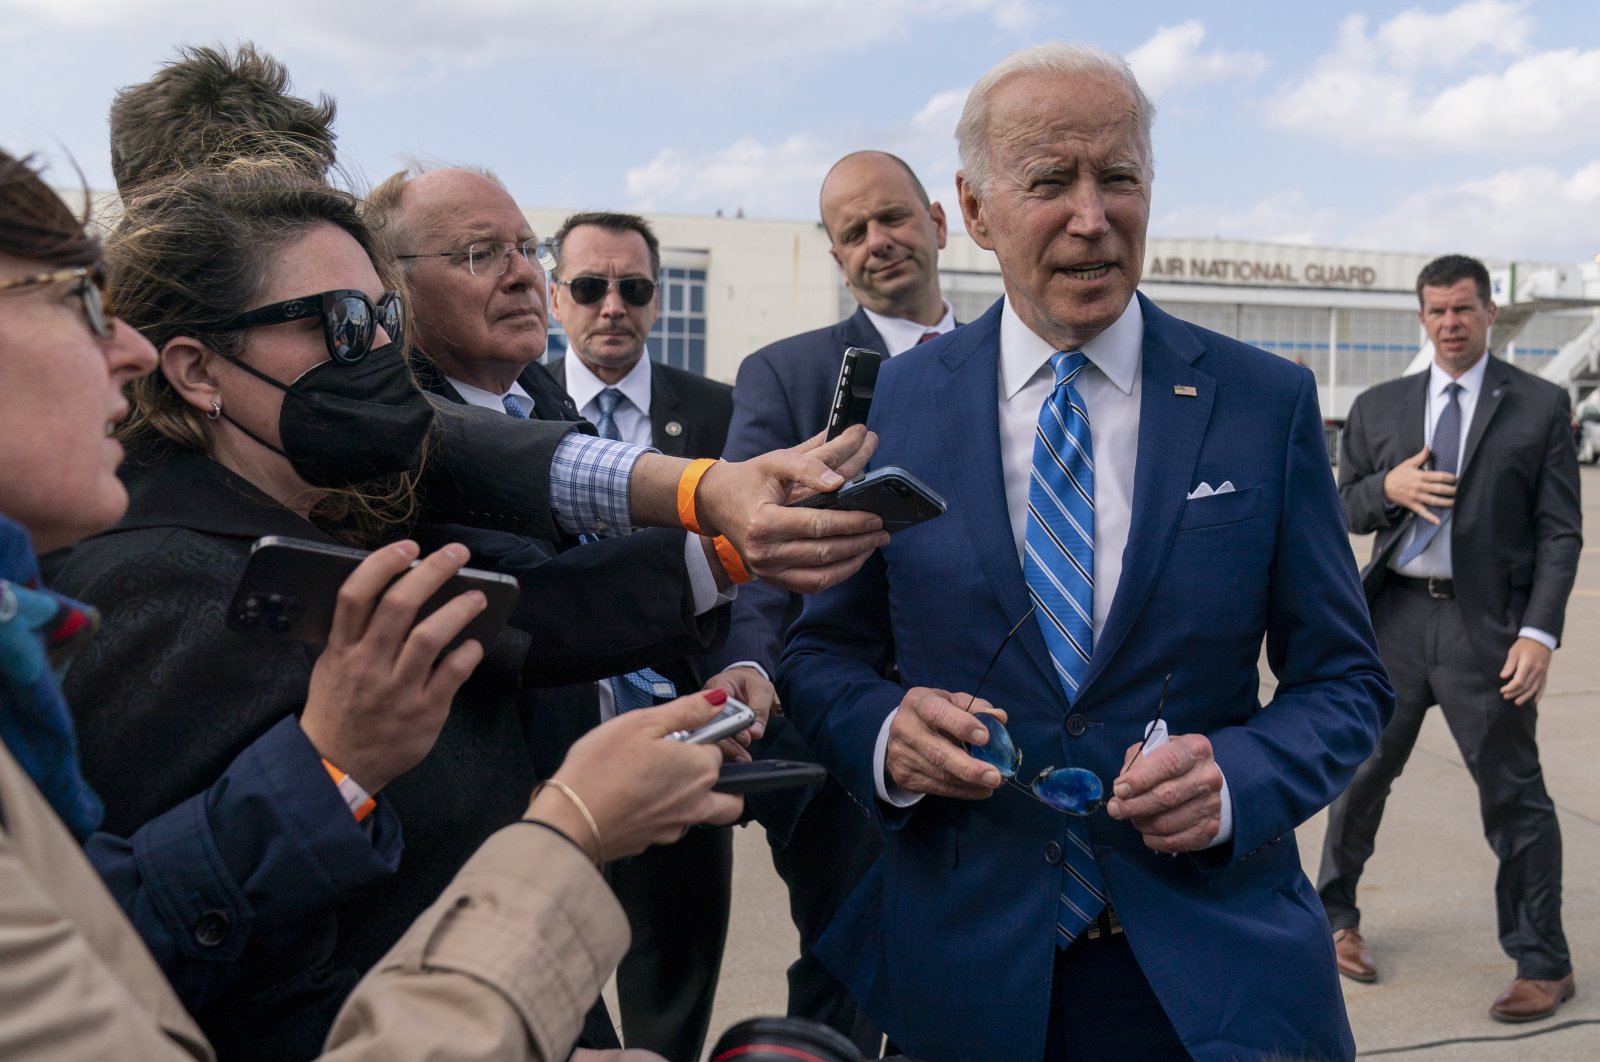 U.S. President Joe Biden speaks to the media before boarding Air Force One at Des Moines International Airport in Des Moines Iowa, en route to Washington, U.S., April 12, 2022. (AP Photo)